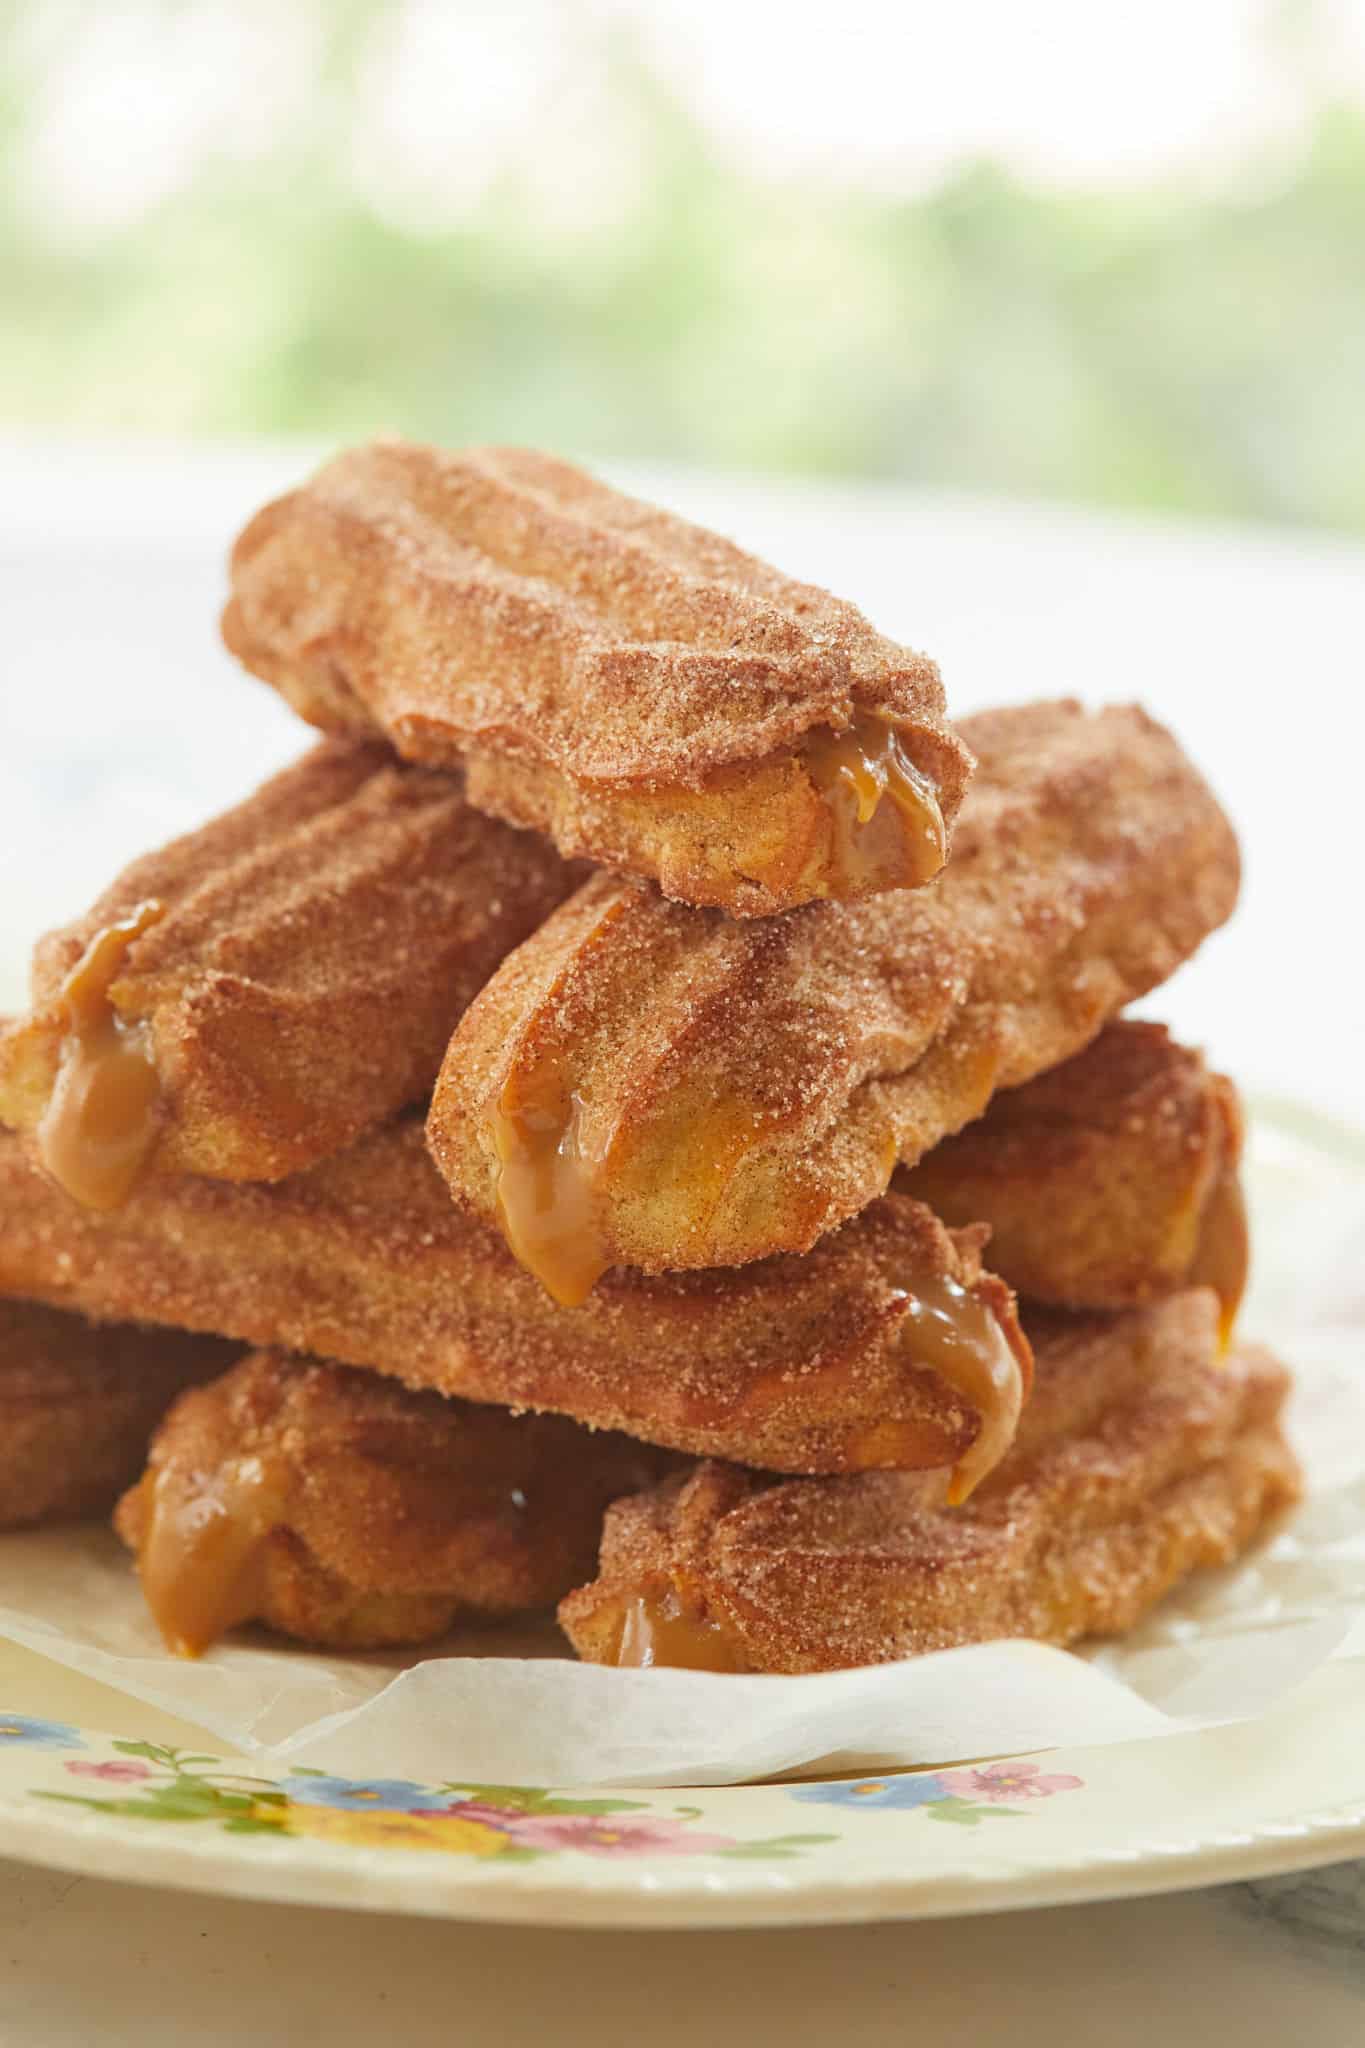 A close up of dulce de leche filled churros, baked in an air fryer.